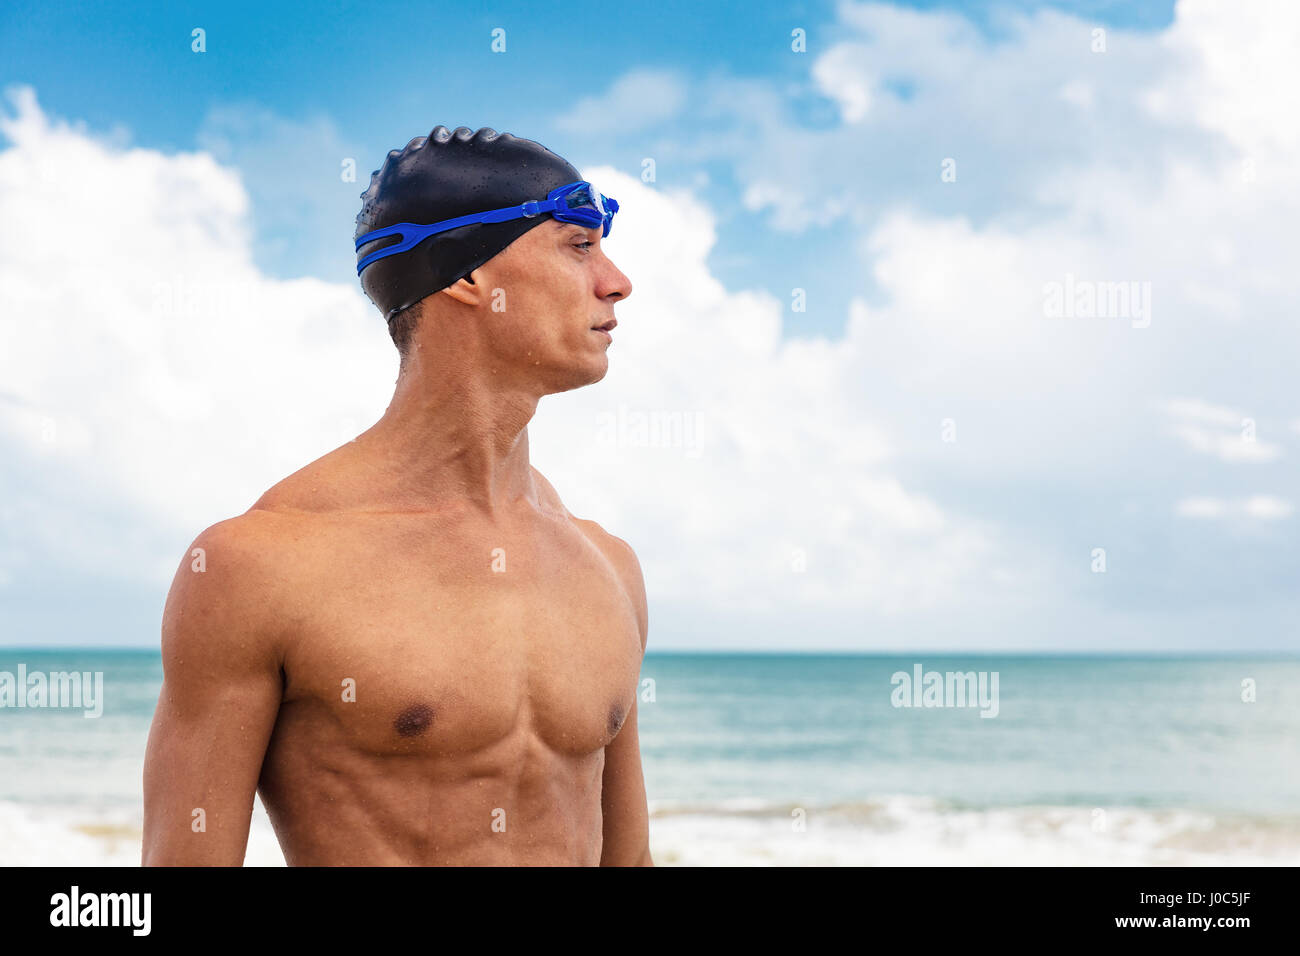 Muscular male swimmer on beach looking away Stock Photo